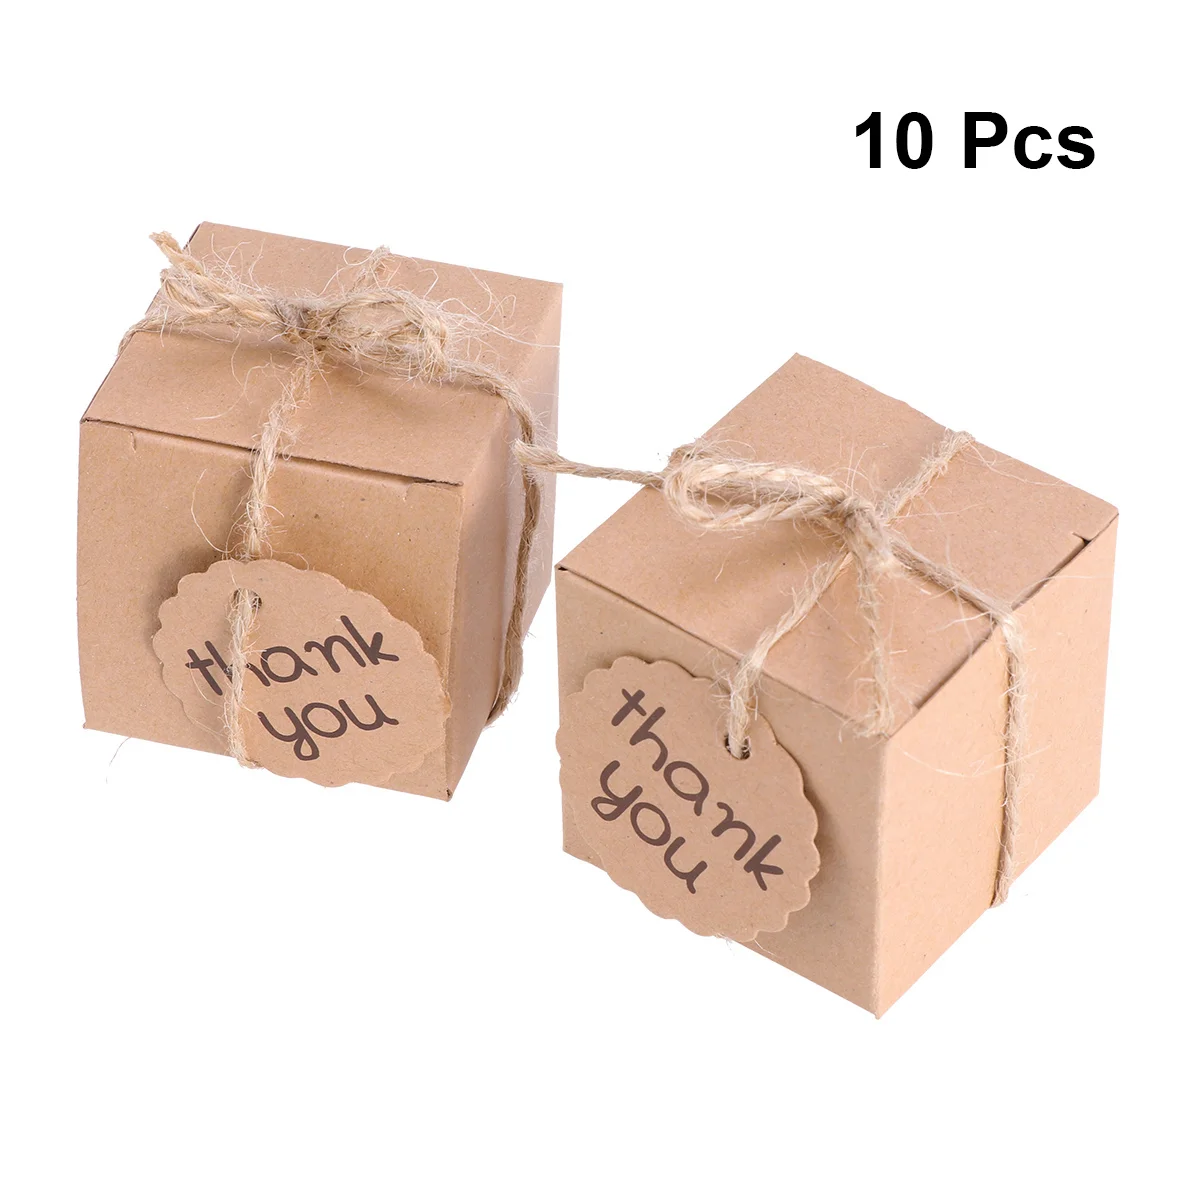 

Boxes Gift Candy Wedding Kraft Paper You Thank Favor Treat Box Brown Cookie Christmas Party Lids Giving Tiny Cotton Earrings